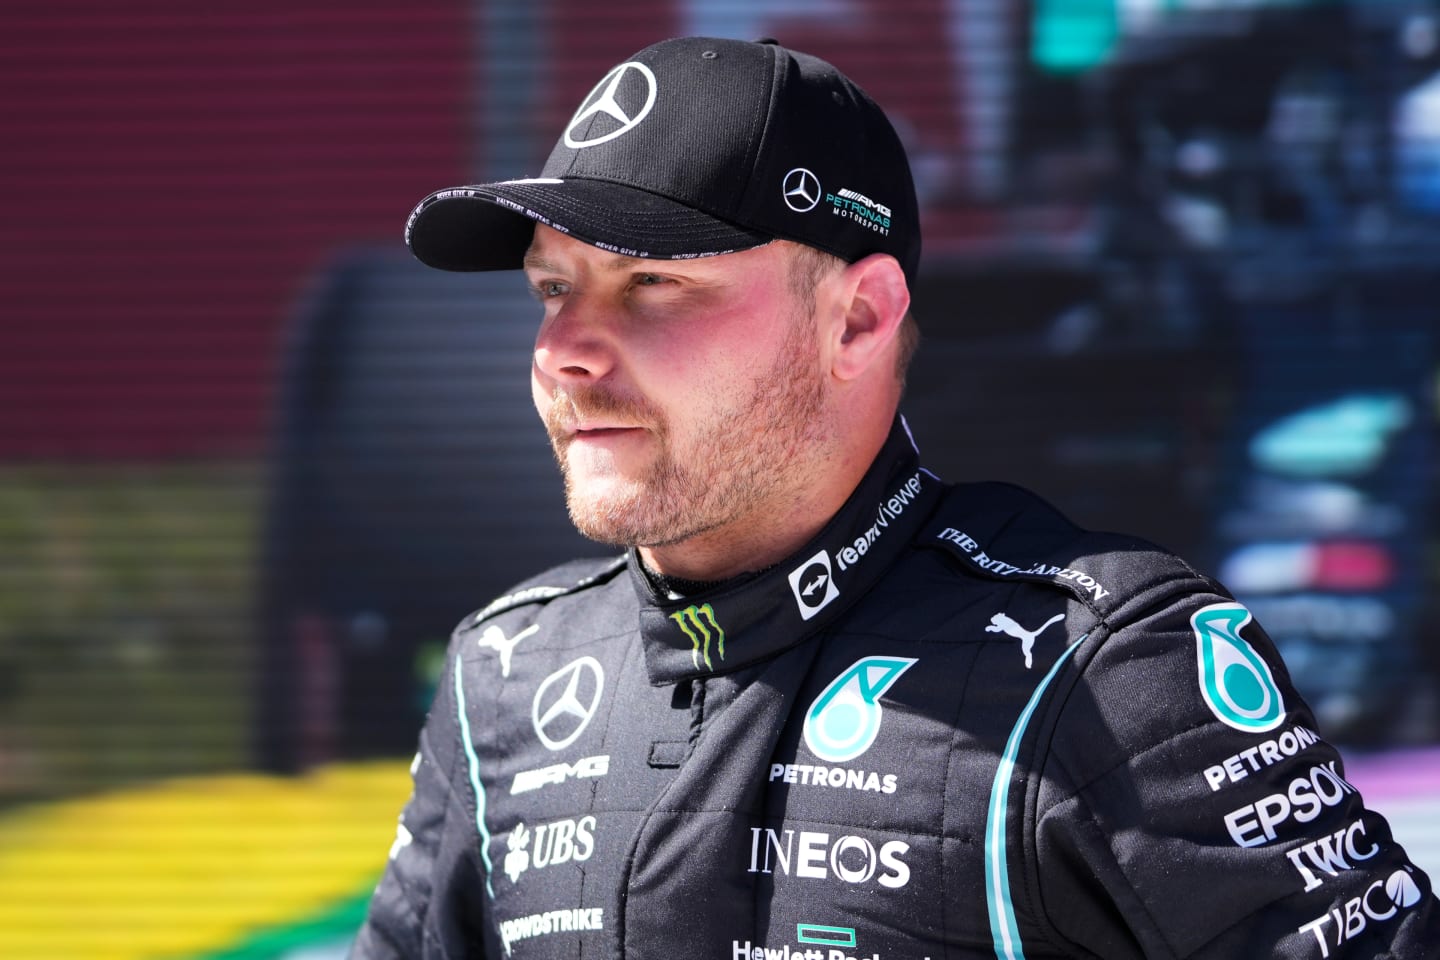 SPIELBERG, AUSTRIA - JUNE 26: Second place qualifier Valtteri Bottas of Finland and Mercedes GP looks on in parc ferme during qualifying ahead of the F1 Grand Prix of Styria at Red Bull Ring on June 26, 2021 in Spielberg, Austria. (Photo by Darko Vojinovic - Pool/Getty Images)